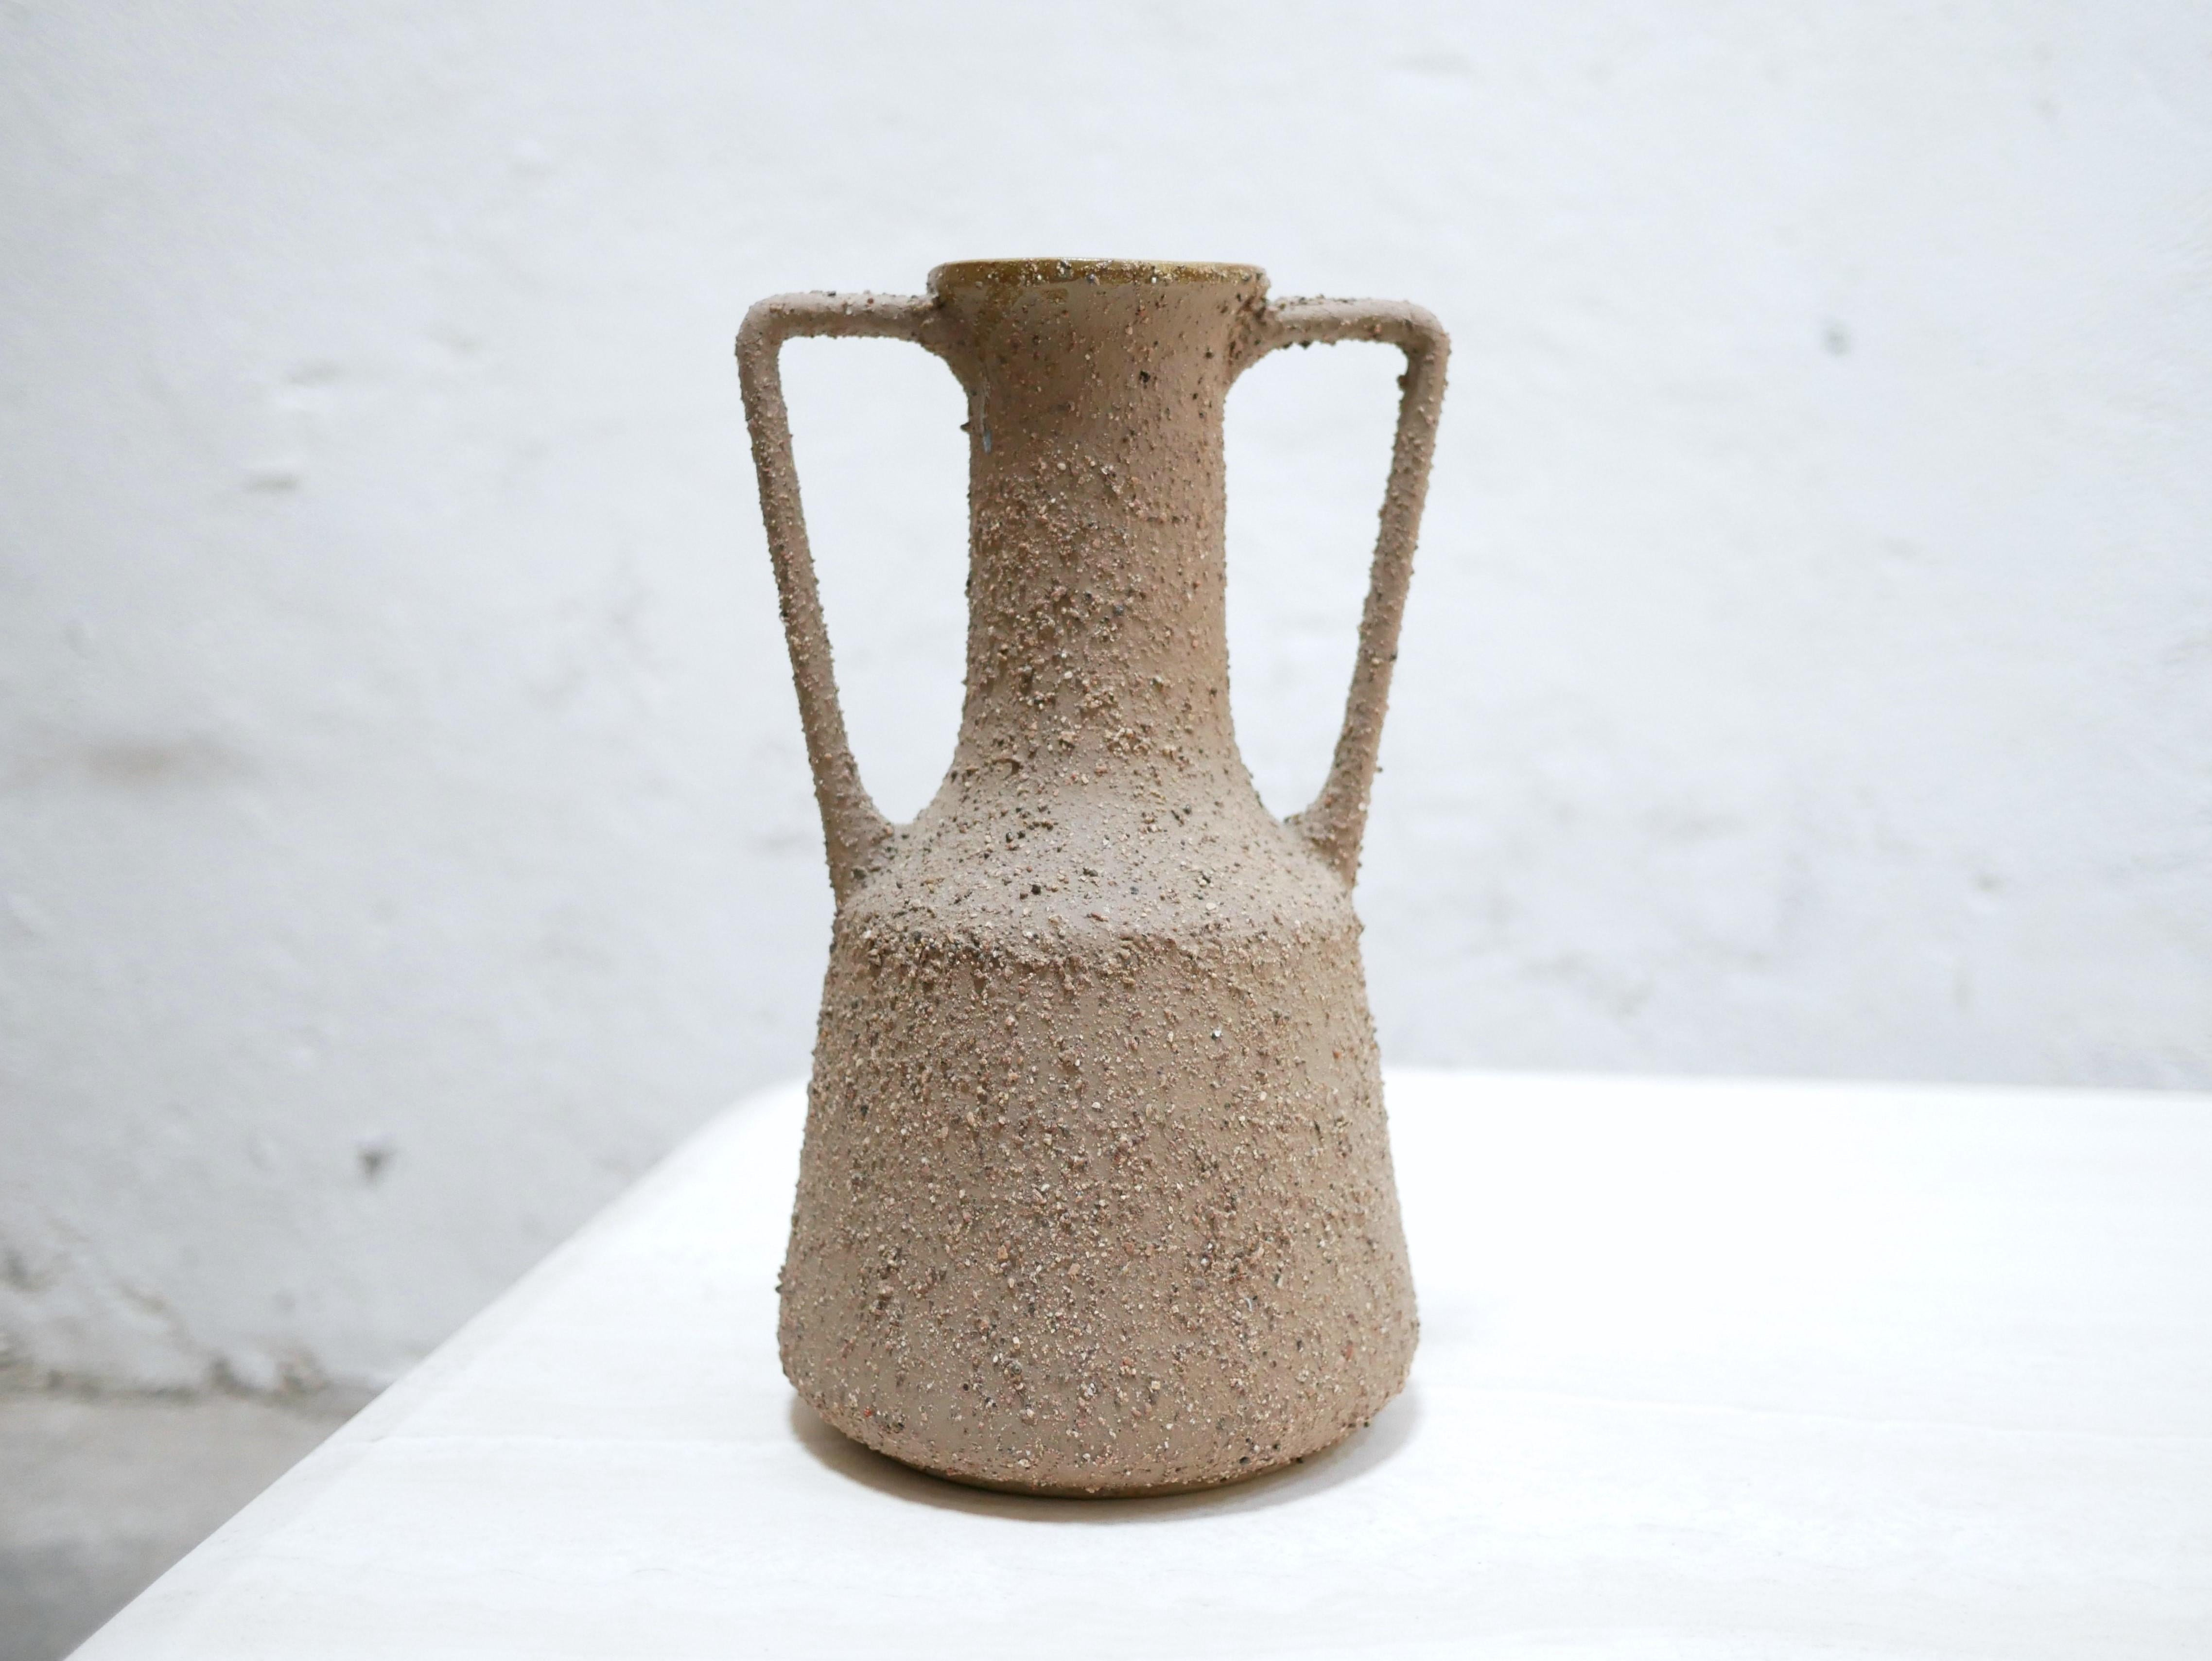 Ceramic vase designed by the Salins factory, France in the 1960s.

With its modern shape and textured mineral color, this ceramic will be perfect in a natural, refined and delicate decoration.
We simply imagine it placed on a shelf or piece of